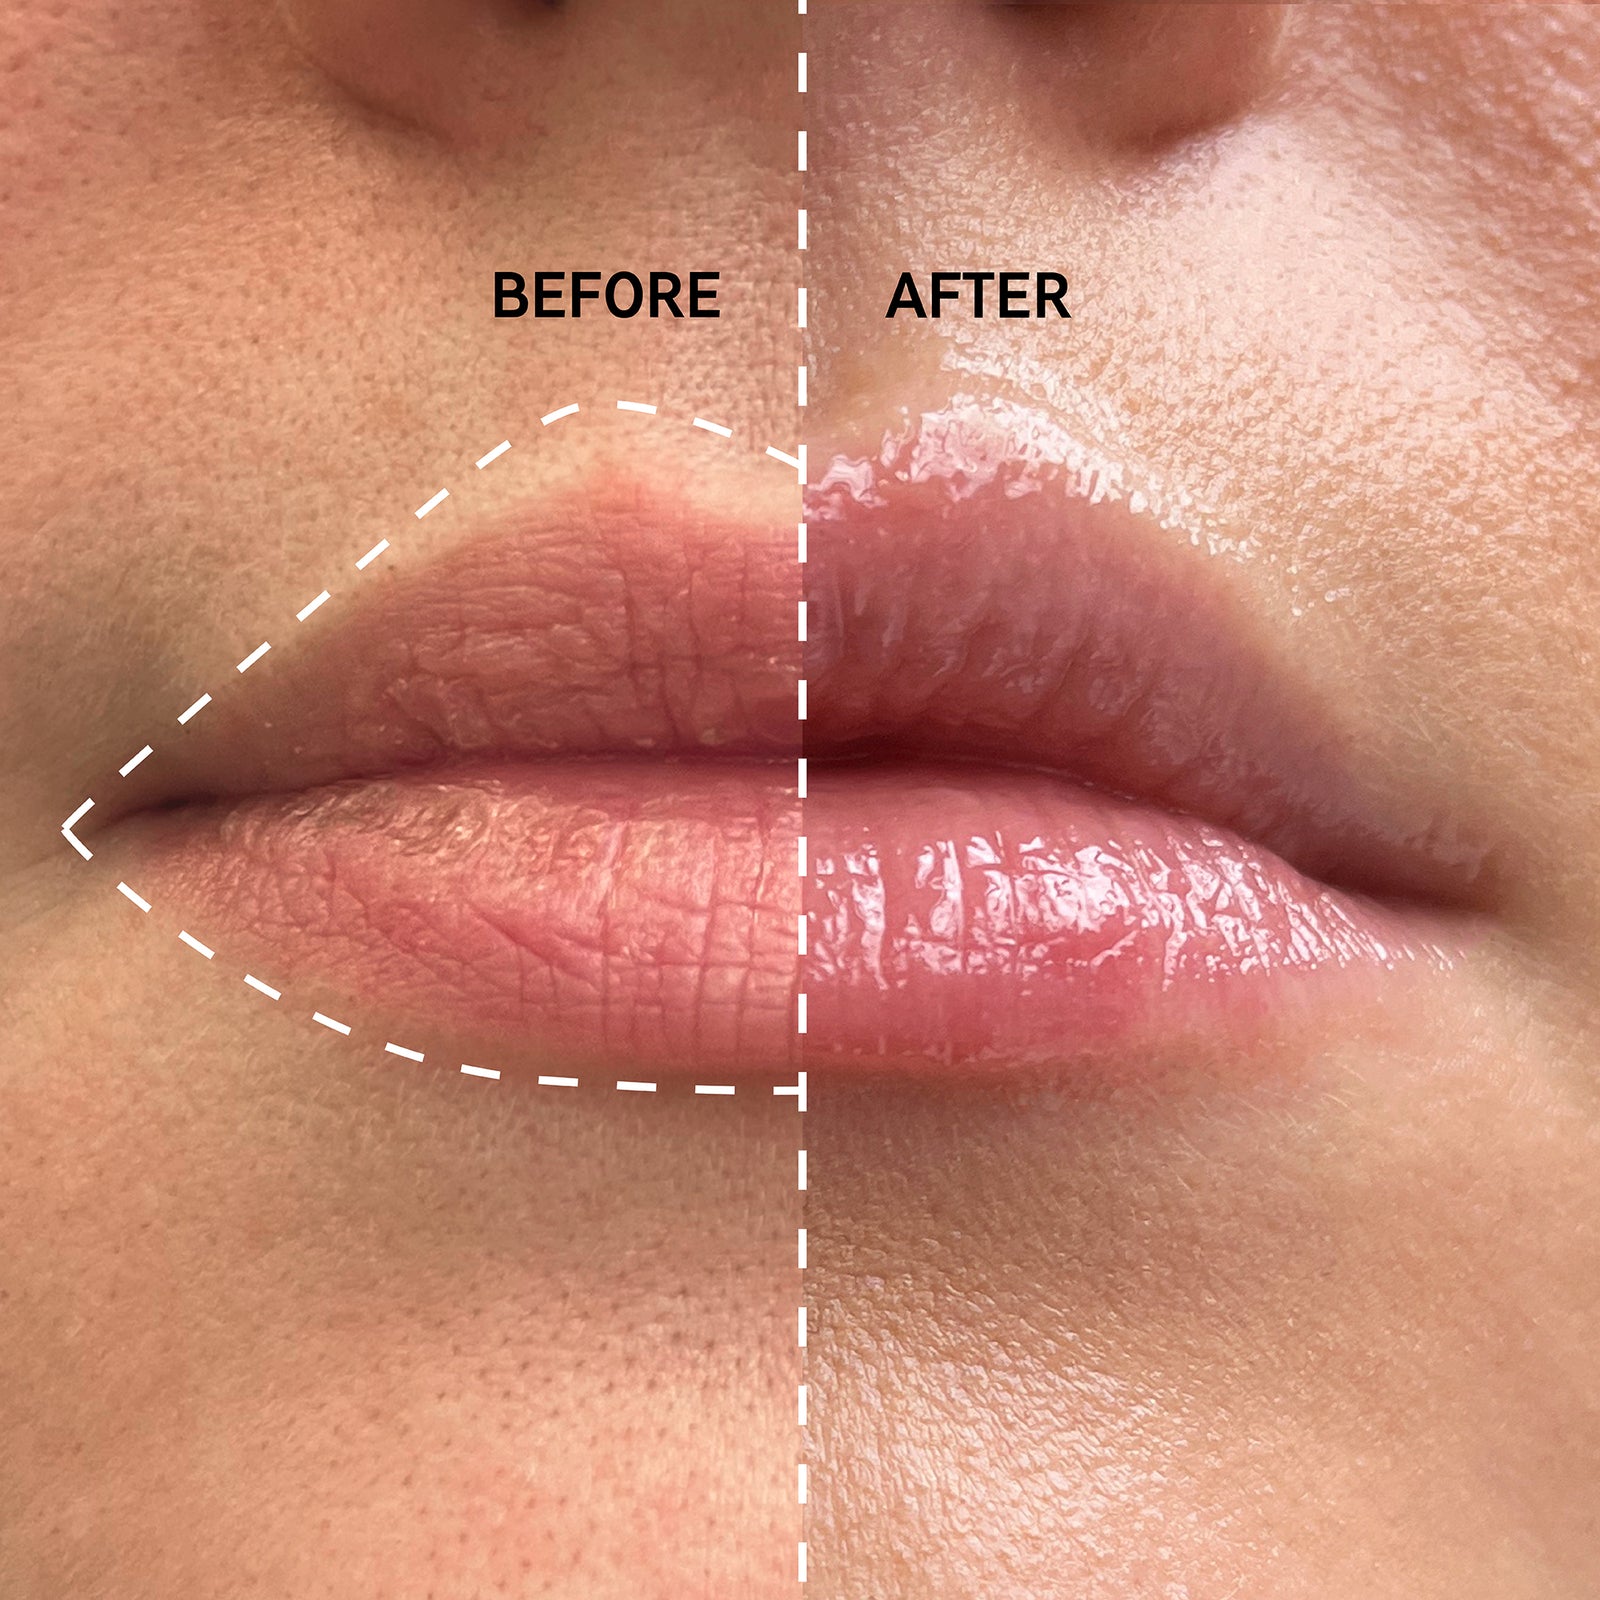 Two images of a pair of lips, put side by side to show the different after using Tripeptide Plumping Lip Balm for 2 weeks.